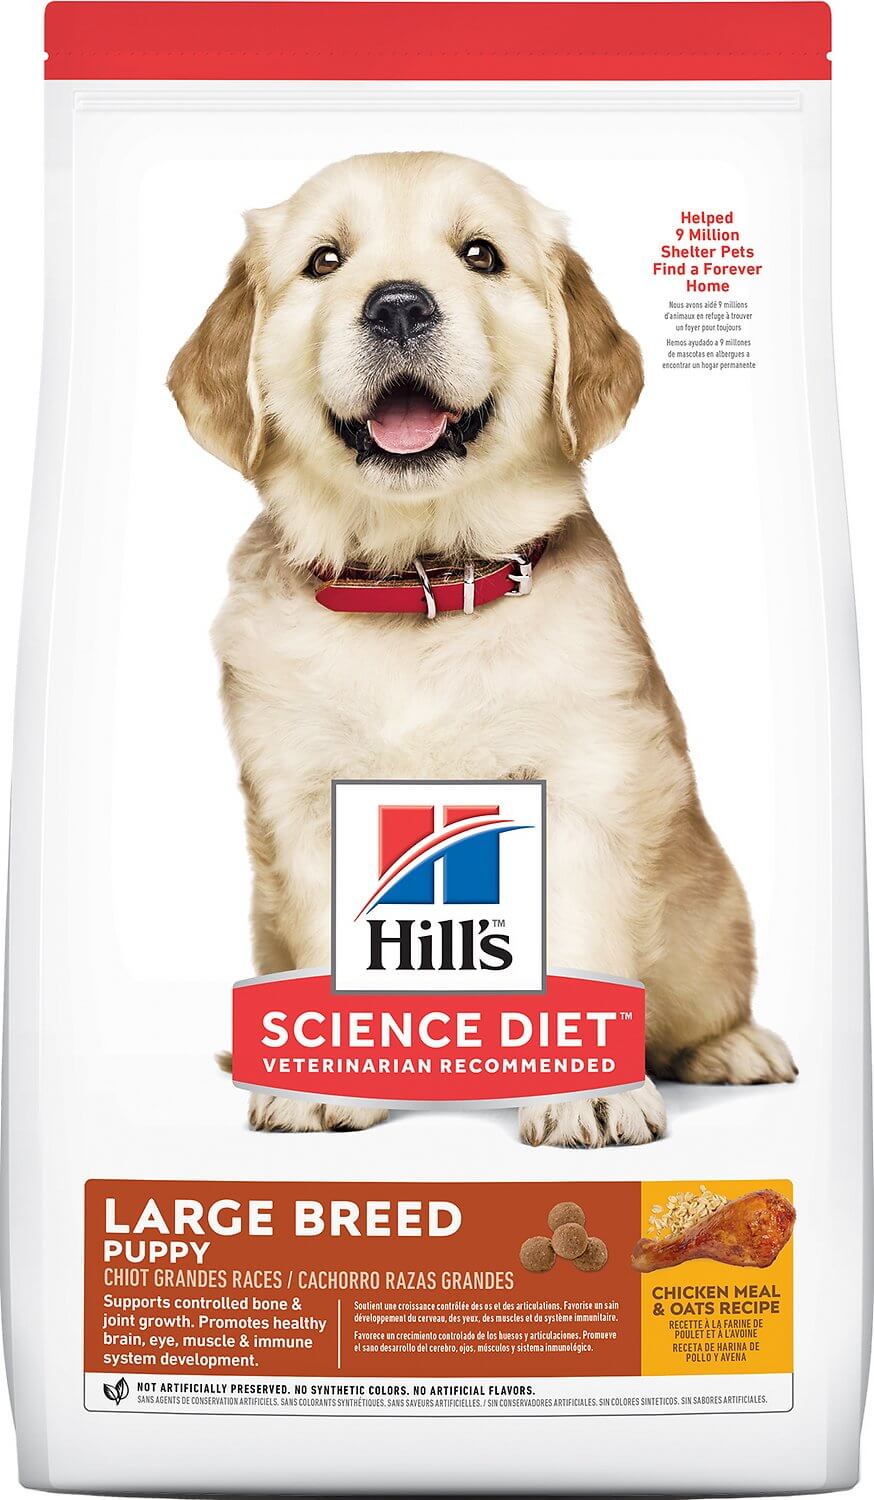 Hill’s Science Diet Large Breed Puppy Food - Best Dog Food for German Shepherds